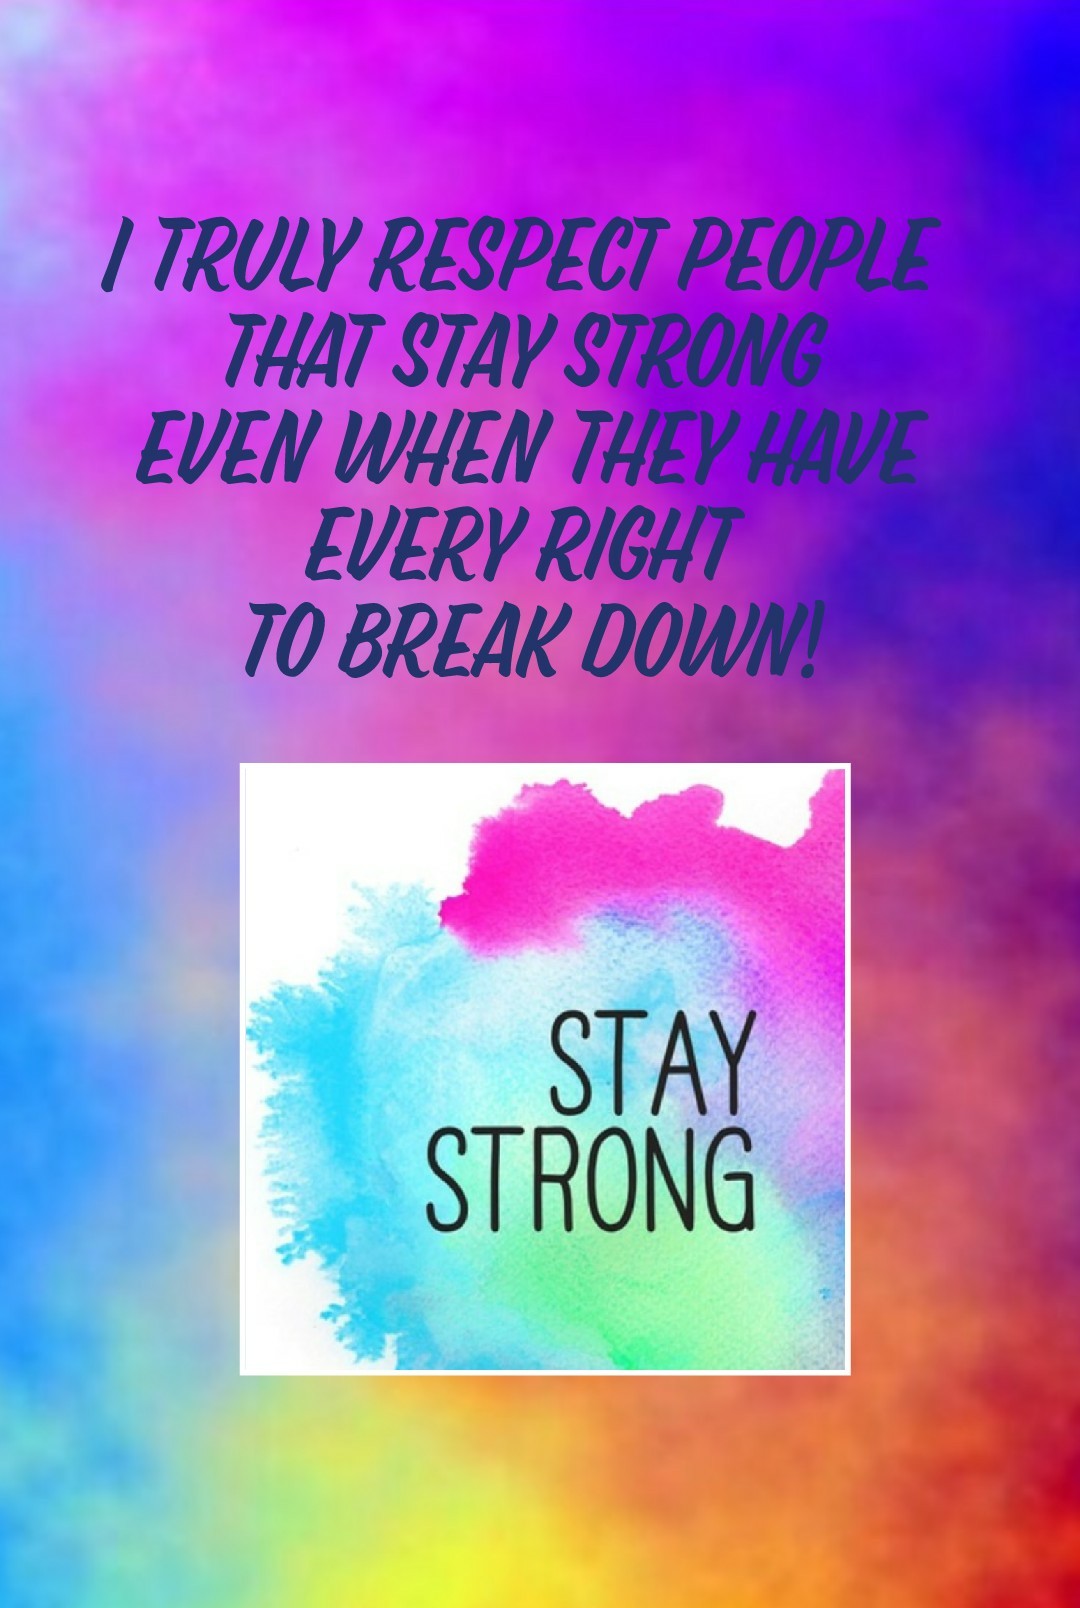 I truly respect people 
that stay strong 
even when they have
every right 
to break down!